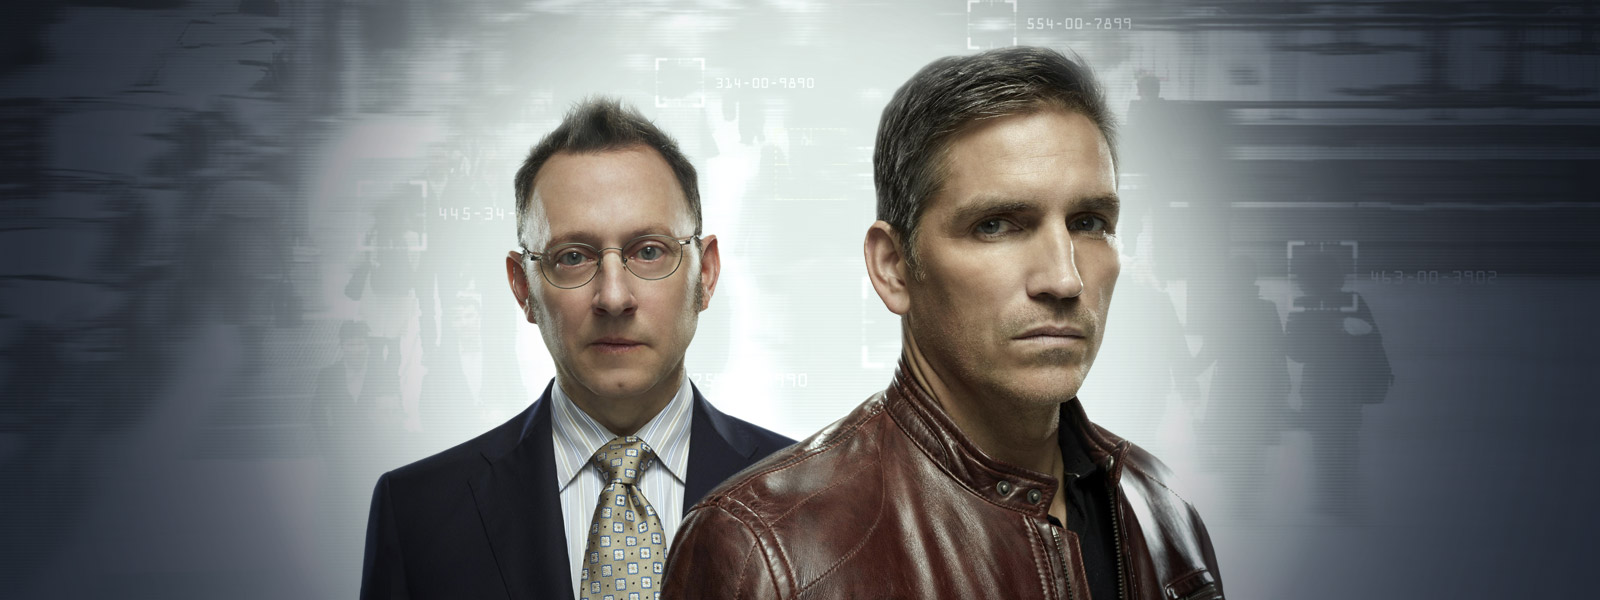 Review: Person of Interest 3.19 “Most Likely To”